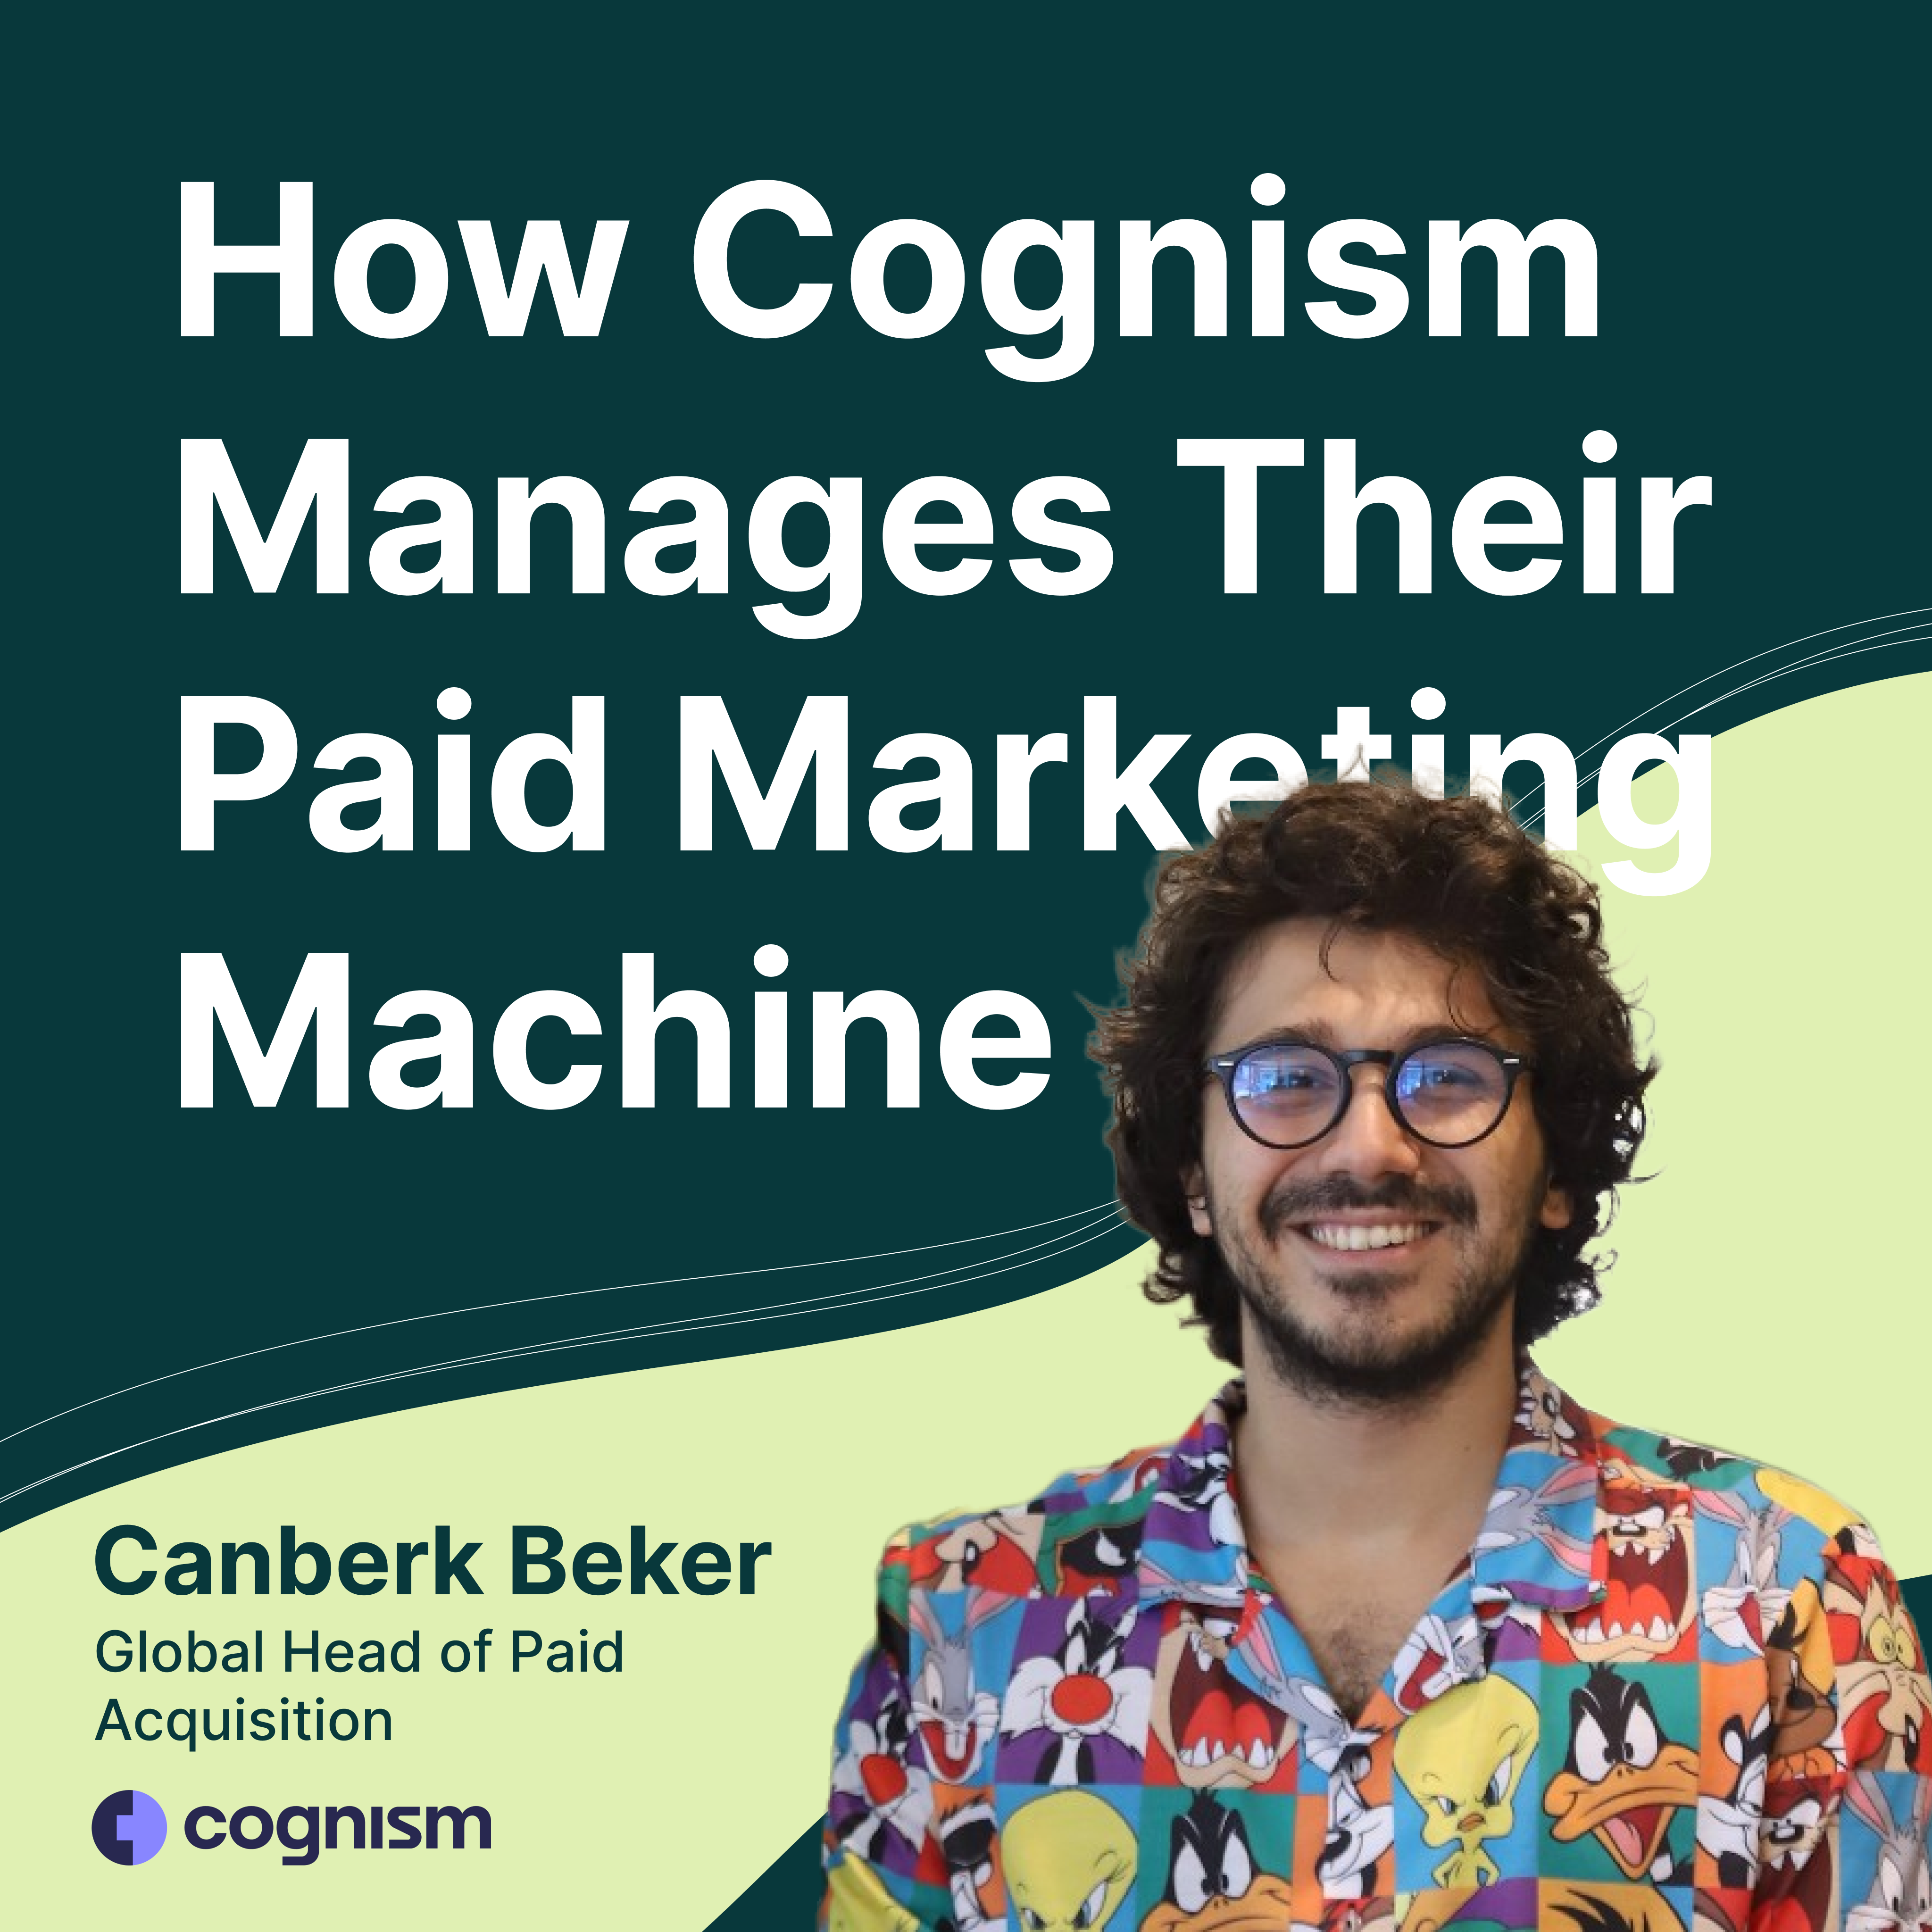 How Cognism Manages Their Paid Marketing Machine